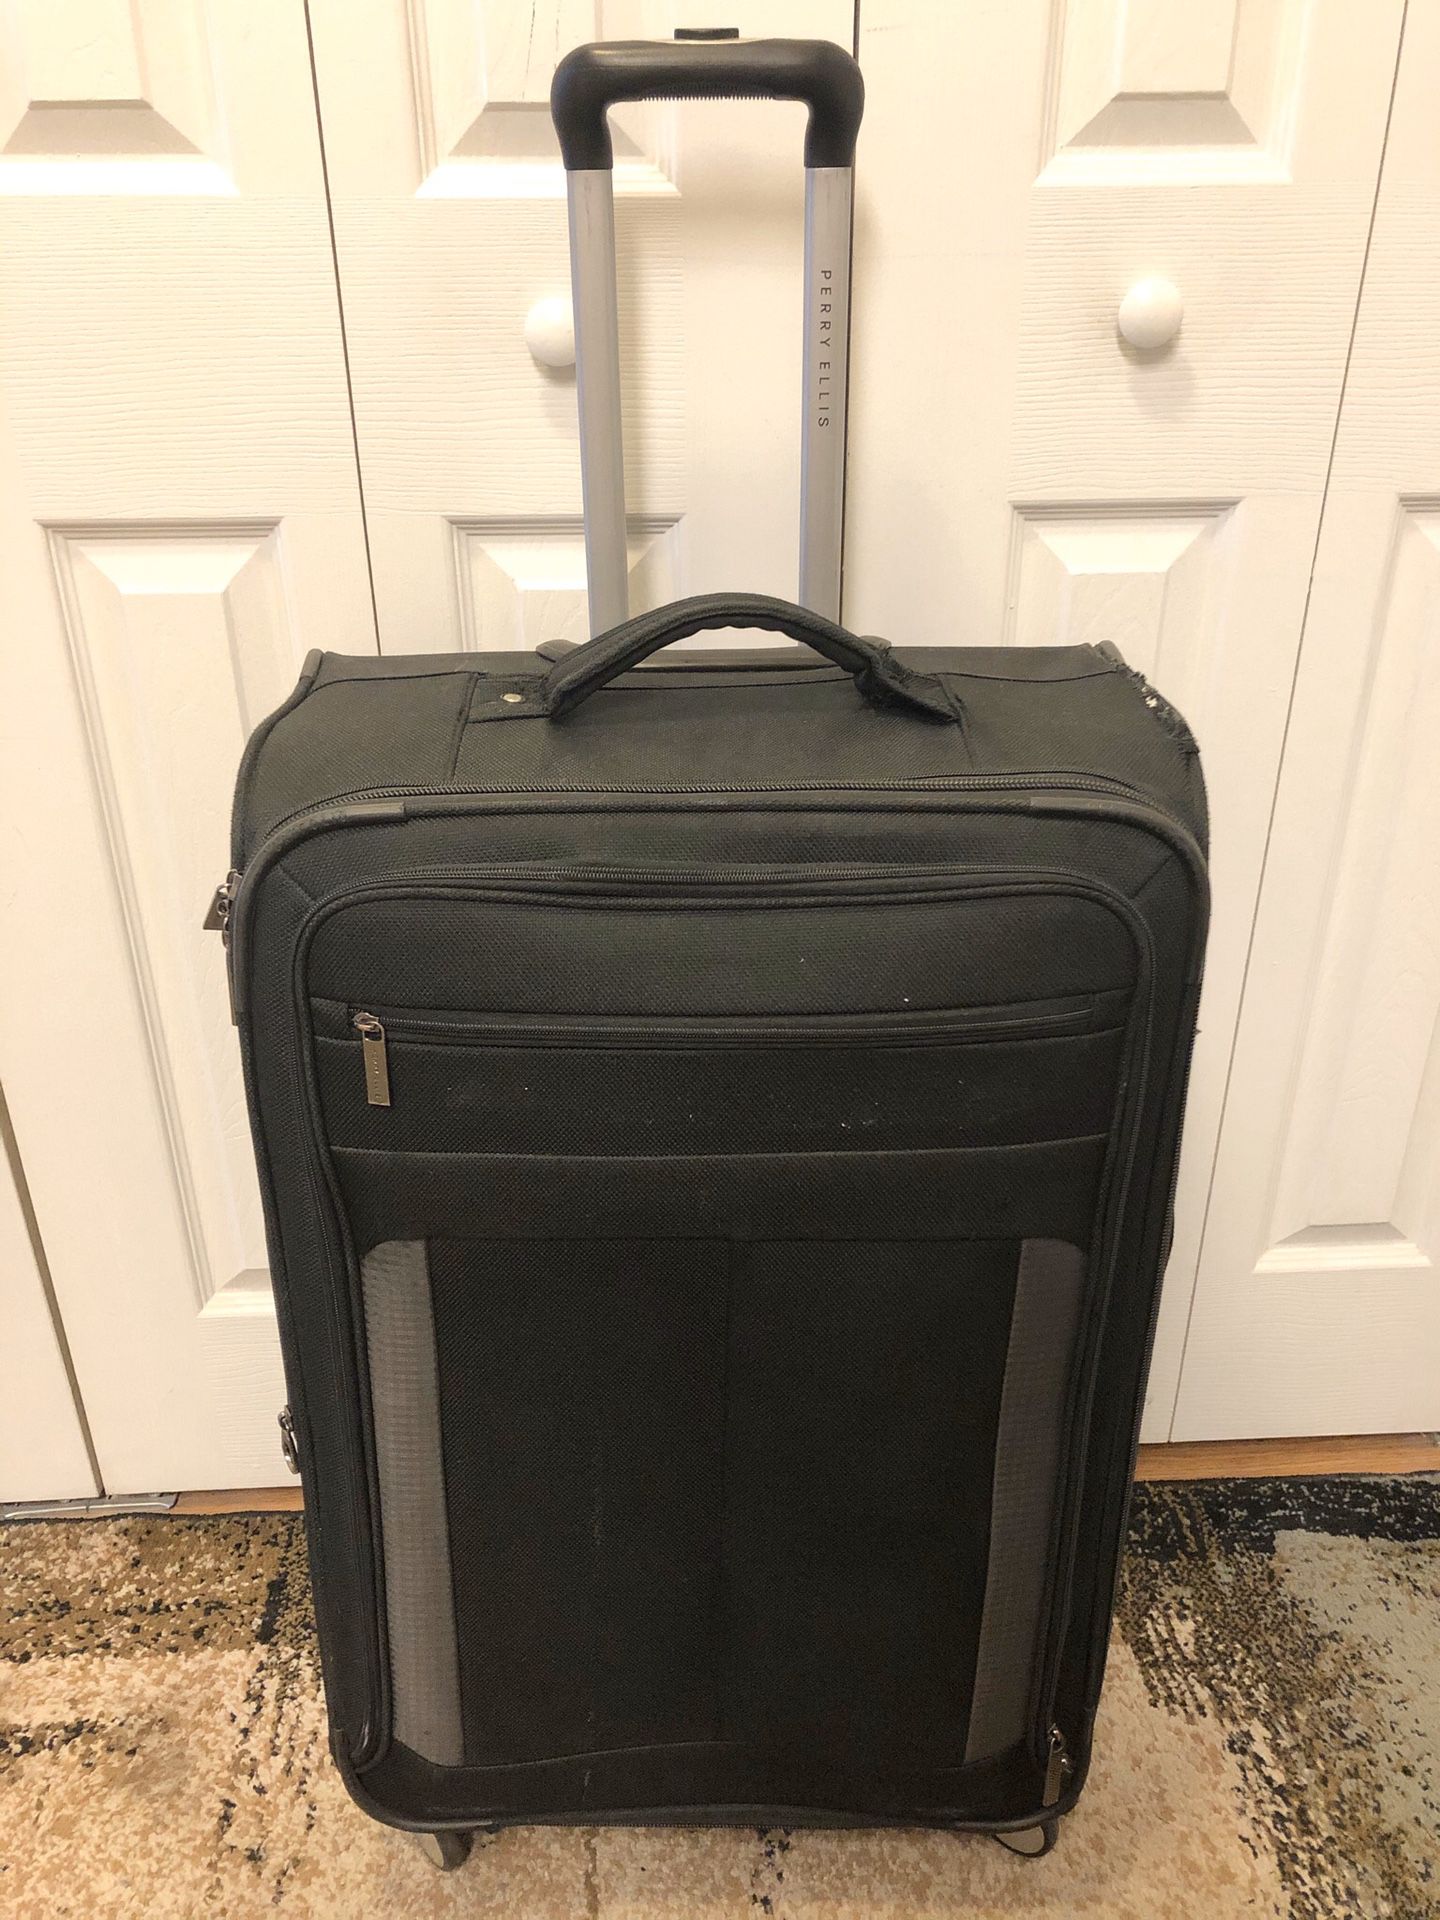 Perry Ellis 30” suitcase rolling luggage expandable